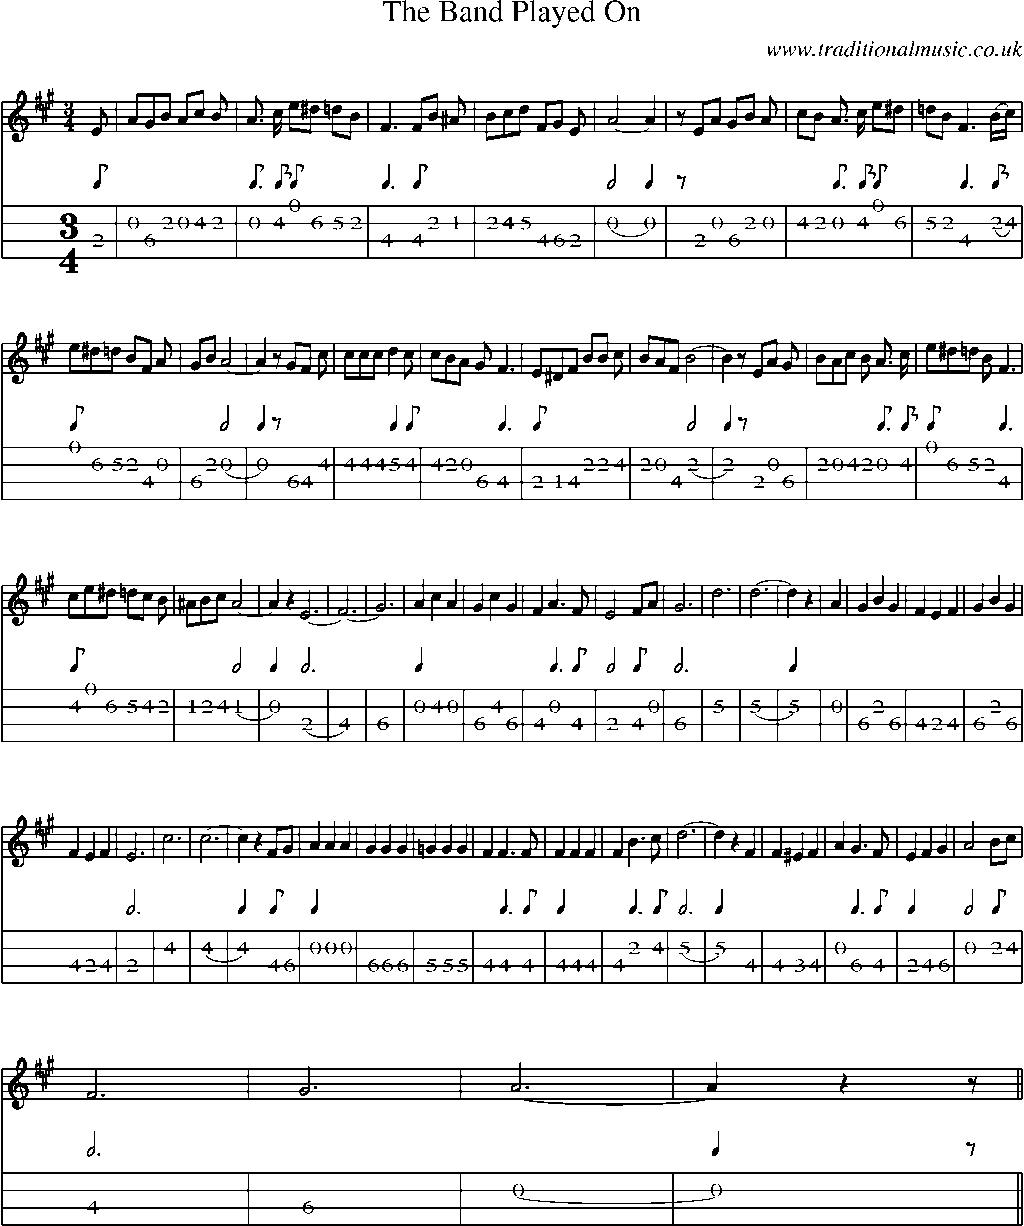 Mandolin Tab and Sheet Music for The Band Played On